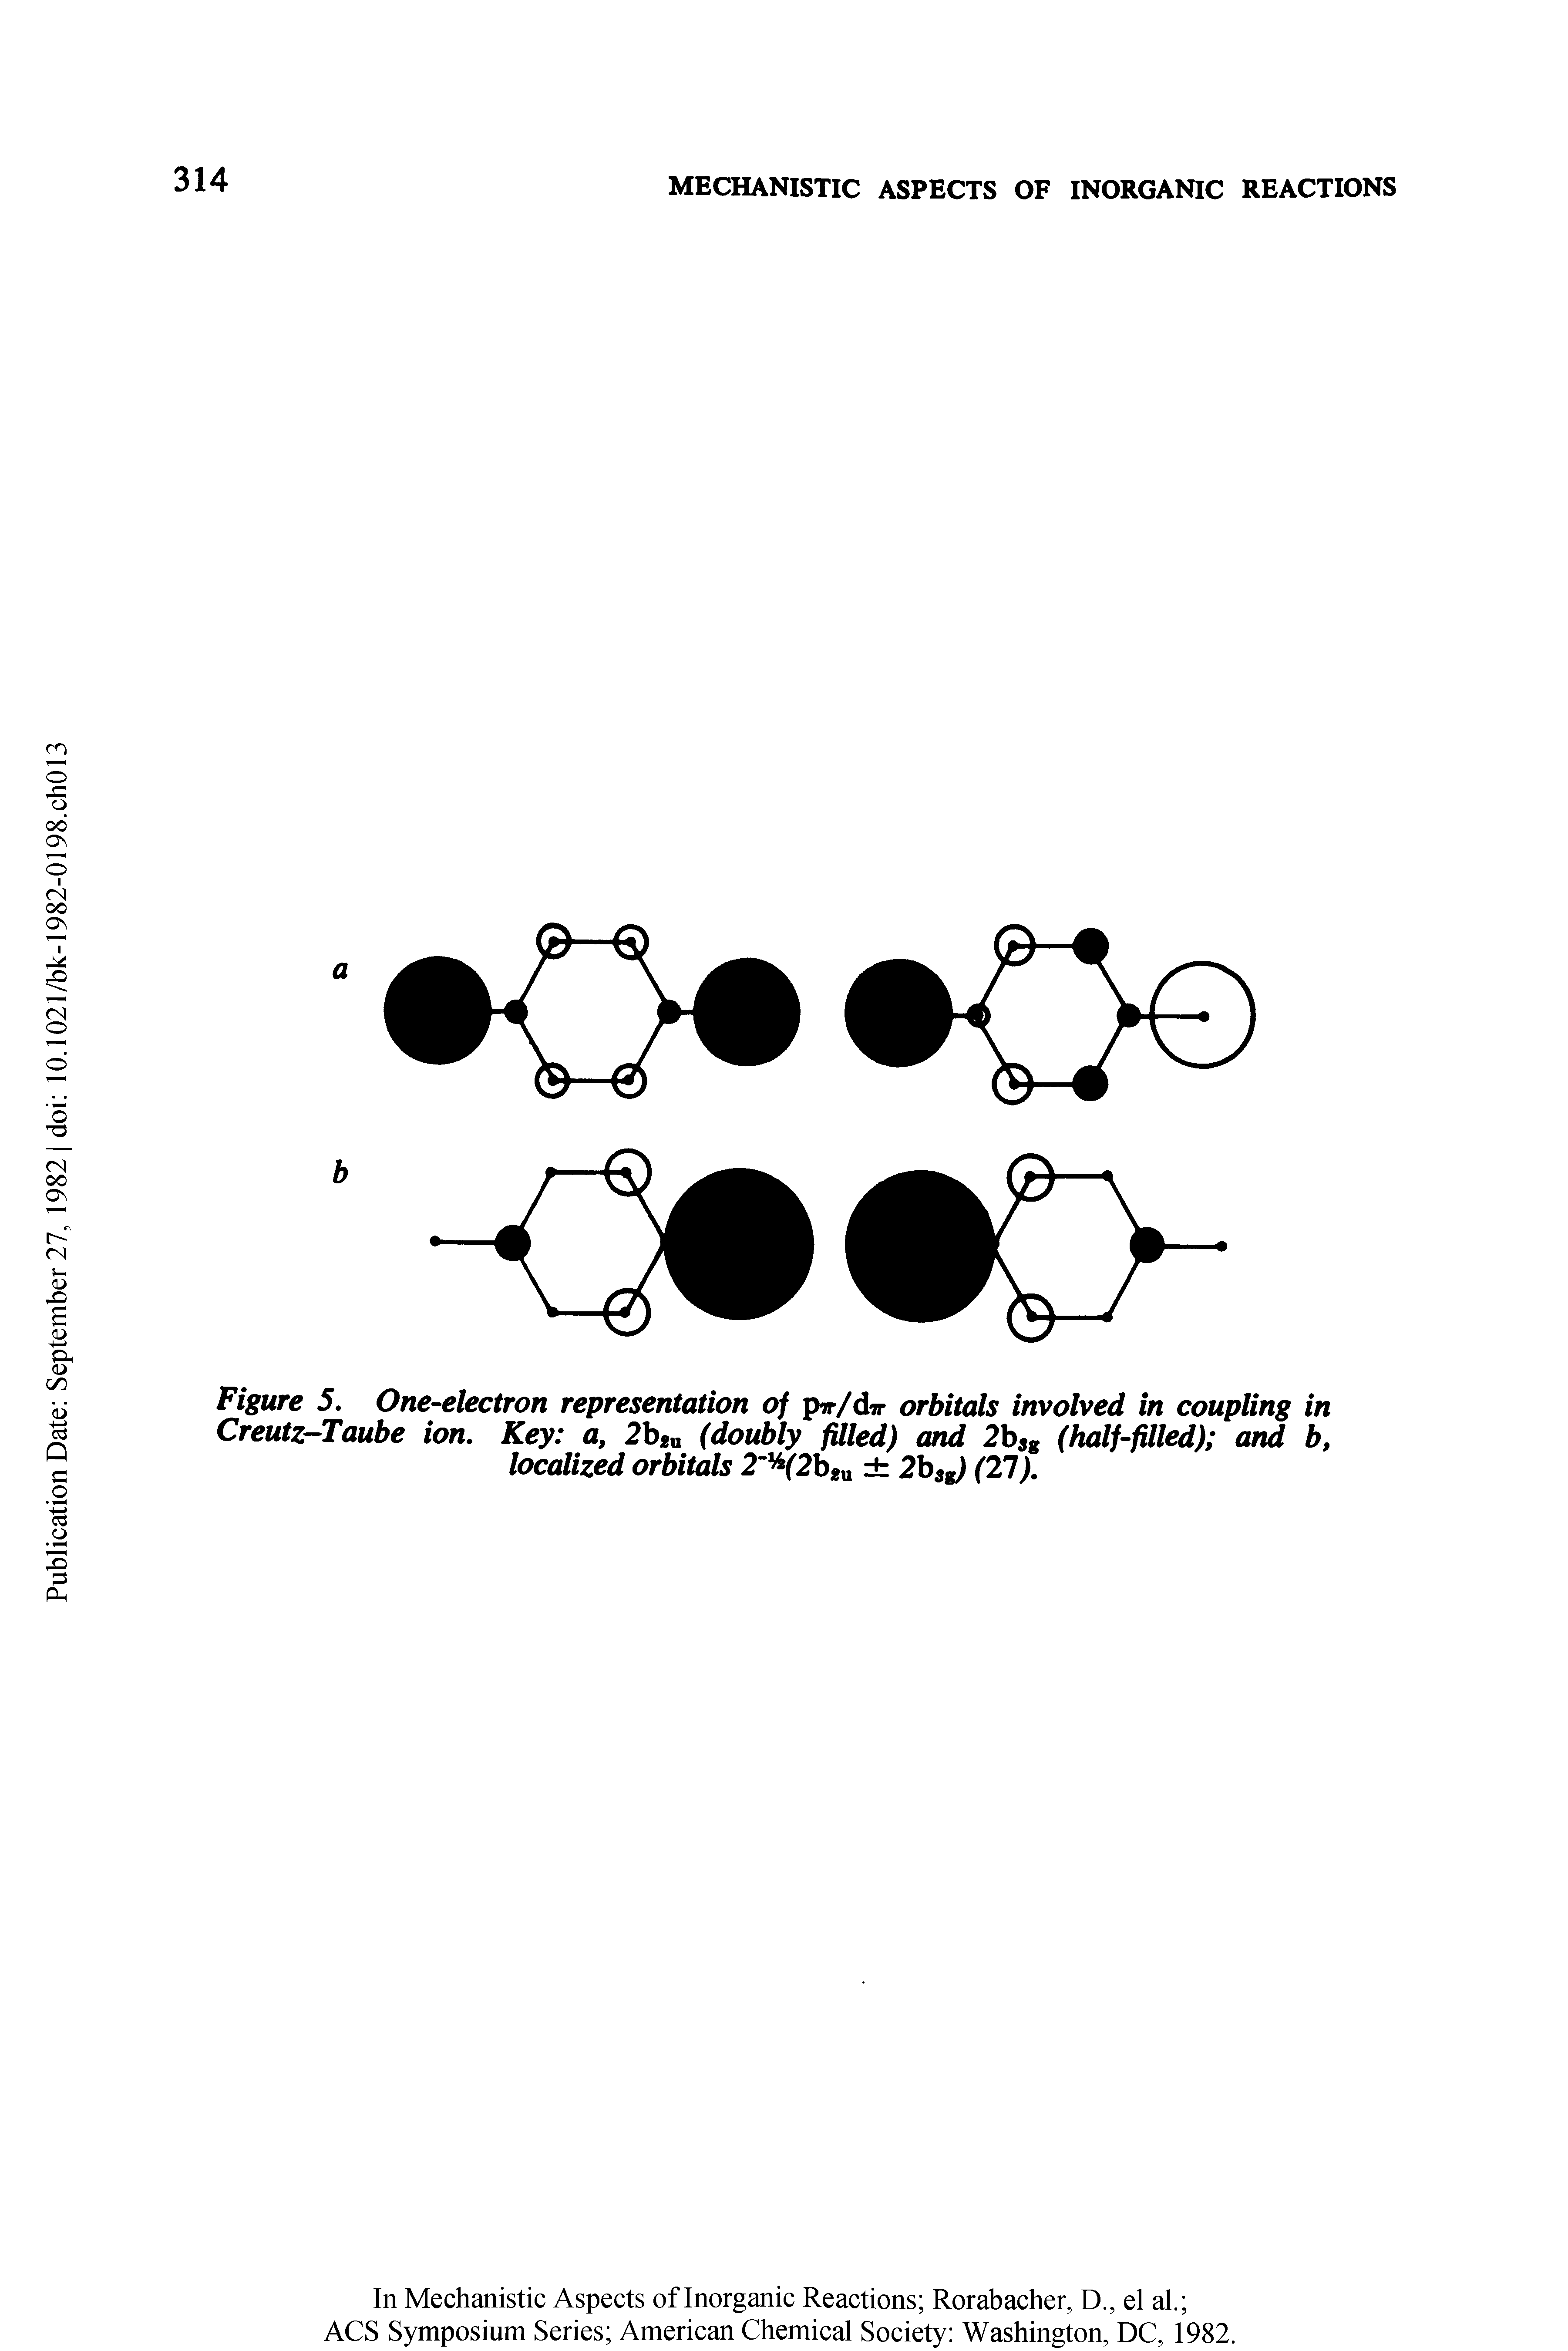 Figure 5. One-electron representation of pir/dw orbitals involved in coupling in Creutz-Taube ion. Key a, 2b u (doubly filled) and 2bSg (half-filled) and b, localized orbitals 2"%(2b u . 2bsg) (21).